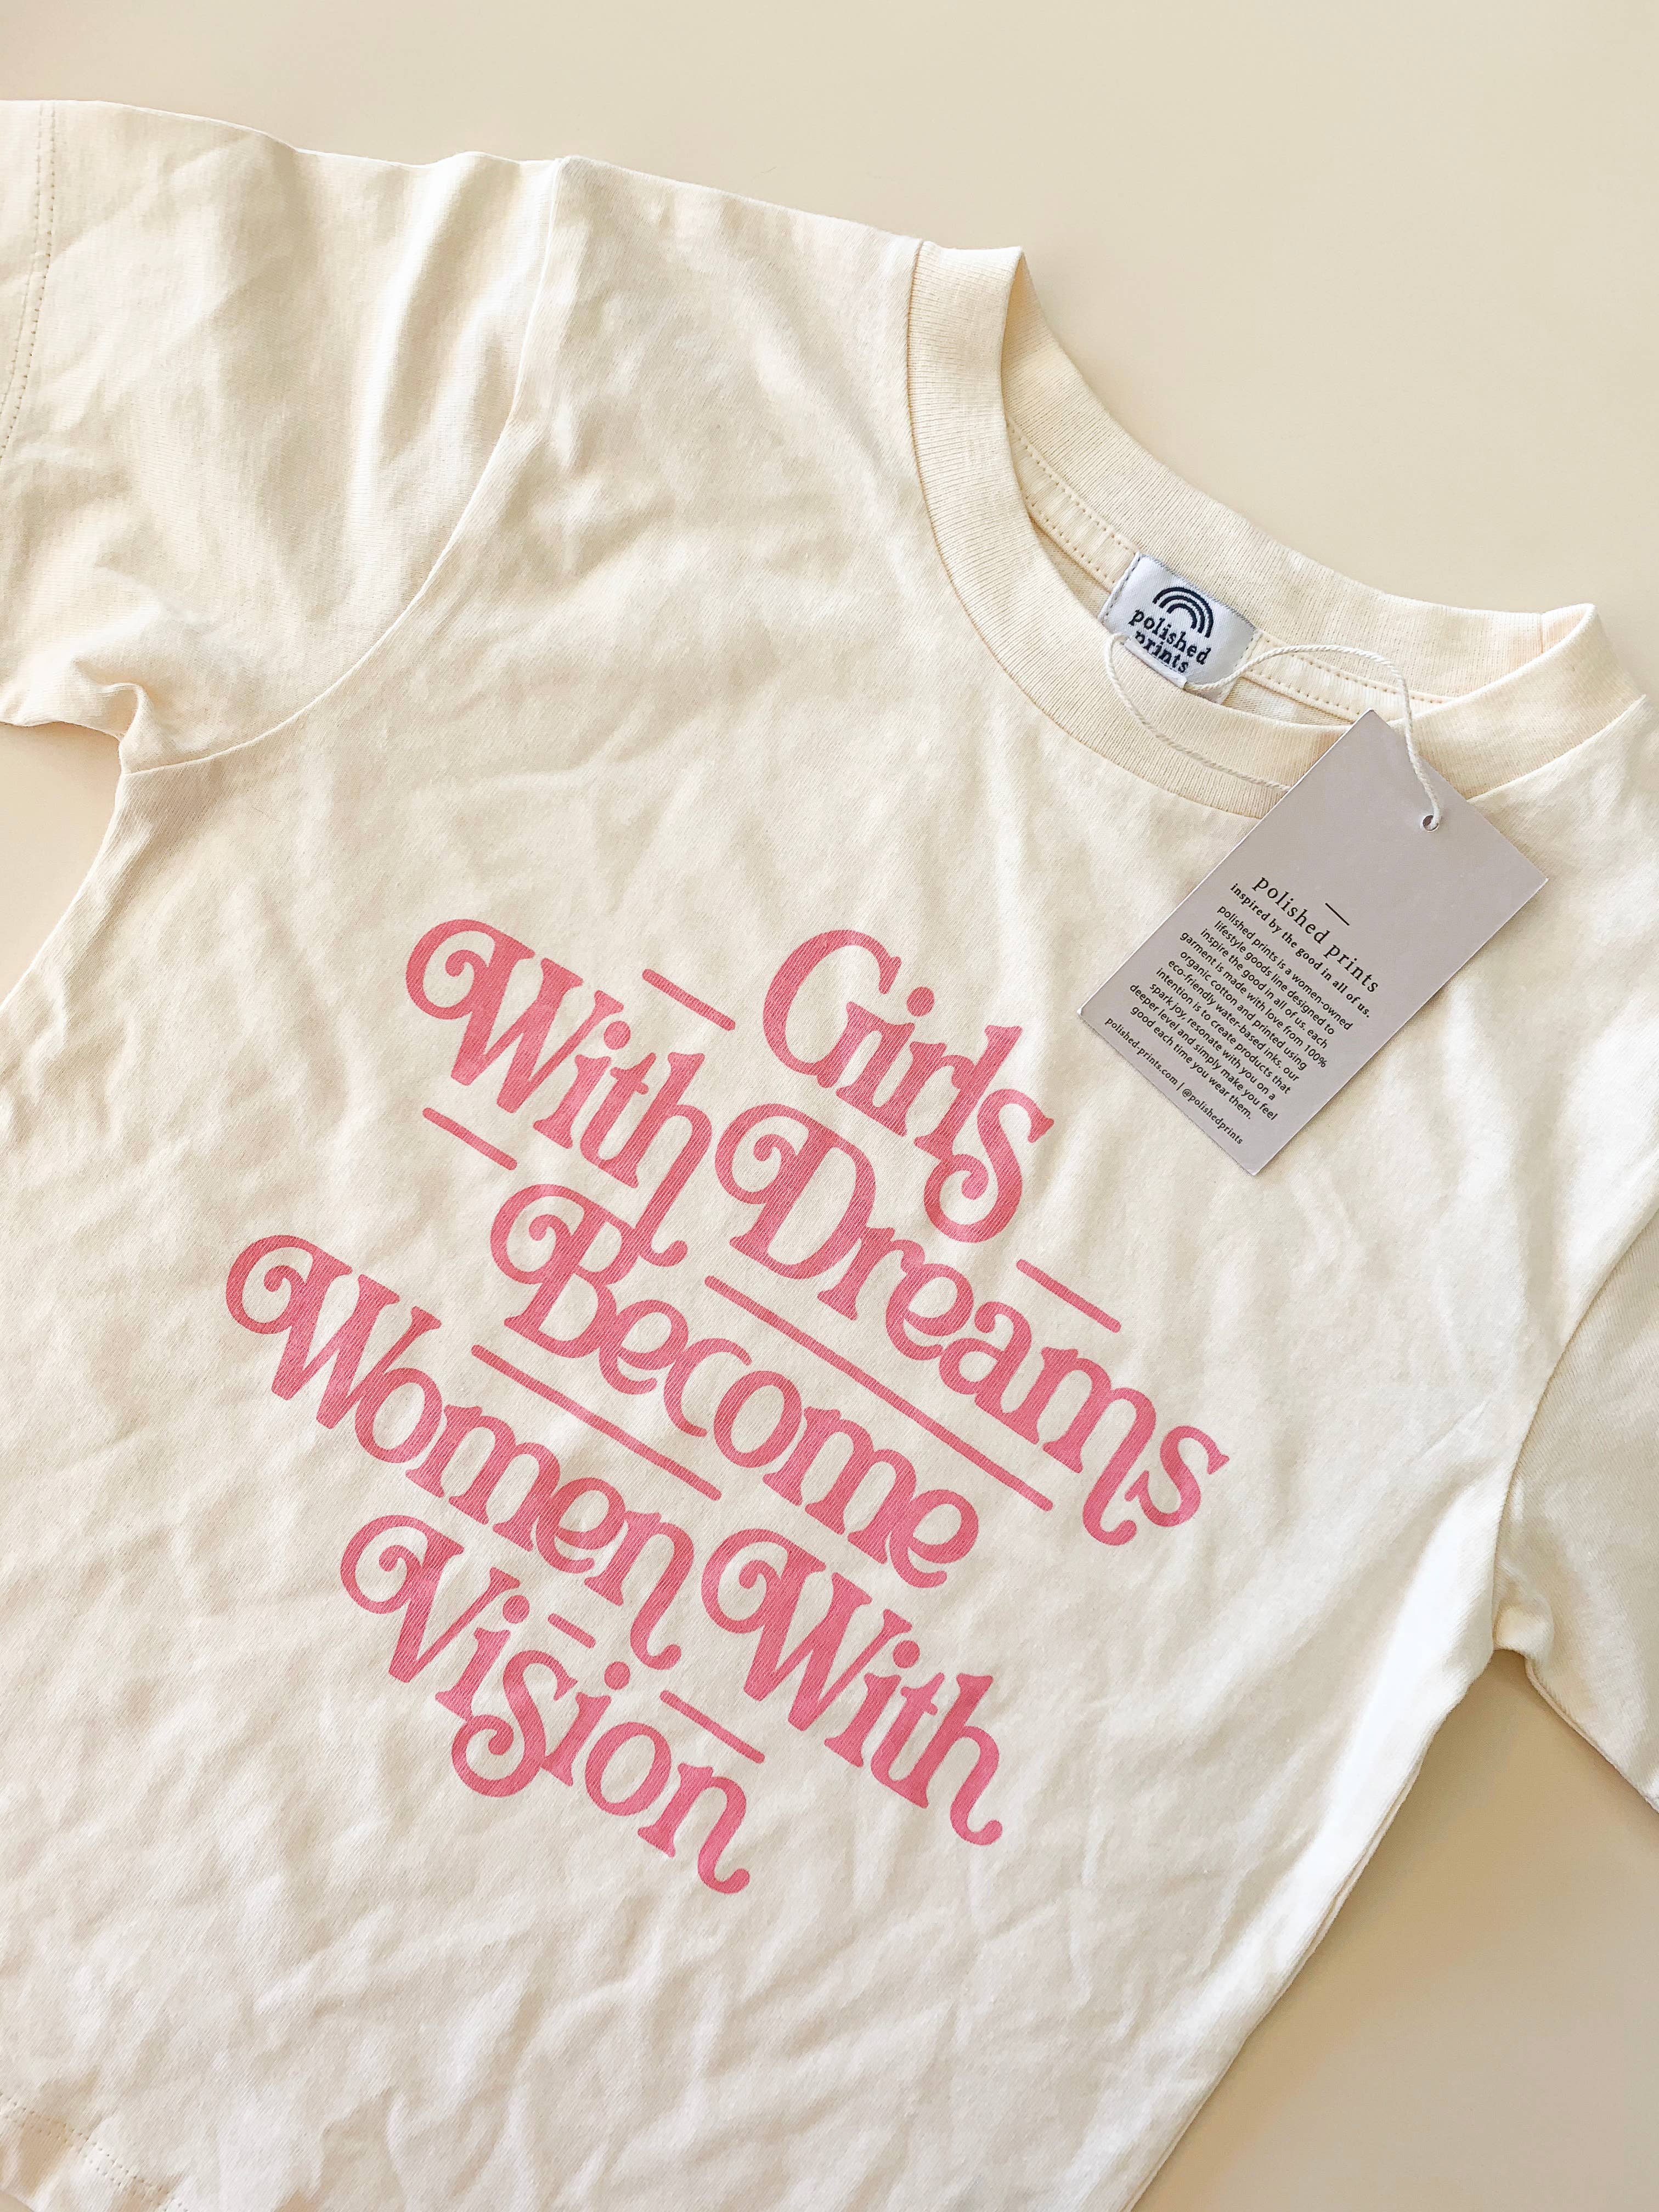 Girls With Dreams, Become Women With Vision Toddler/ Kids tee